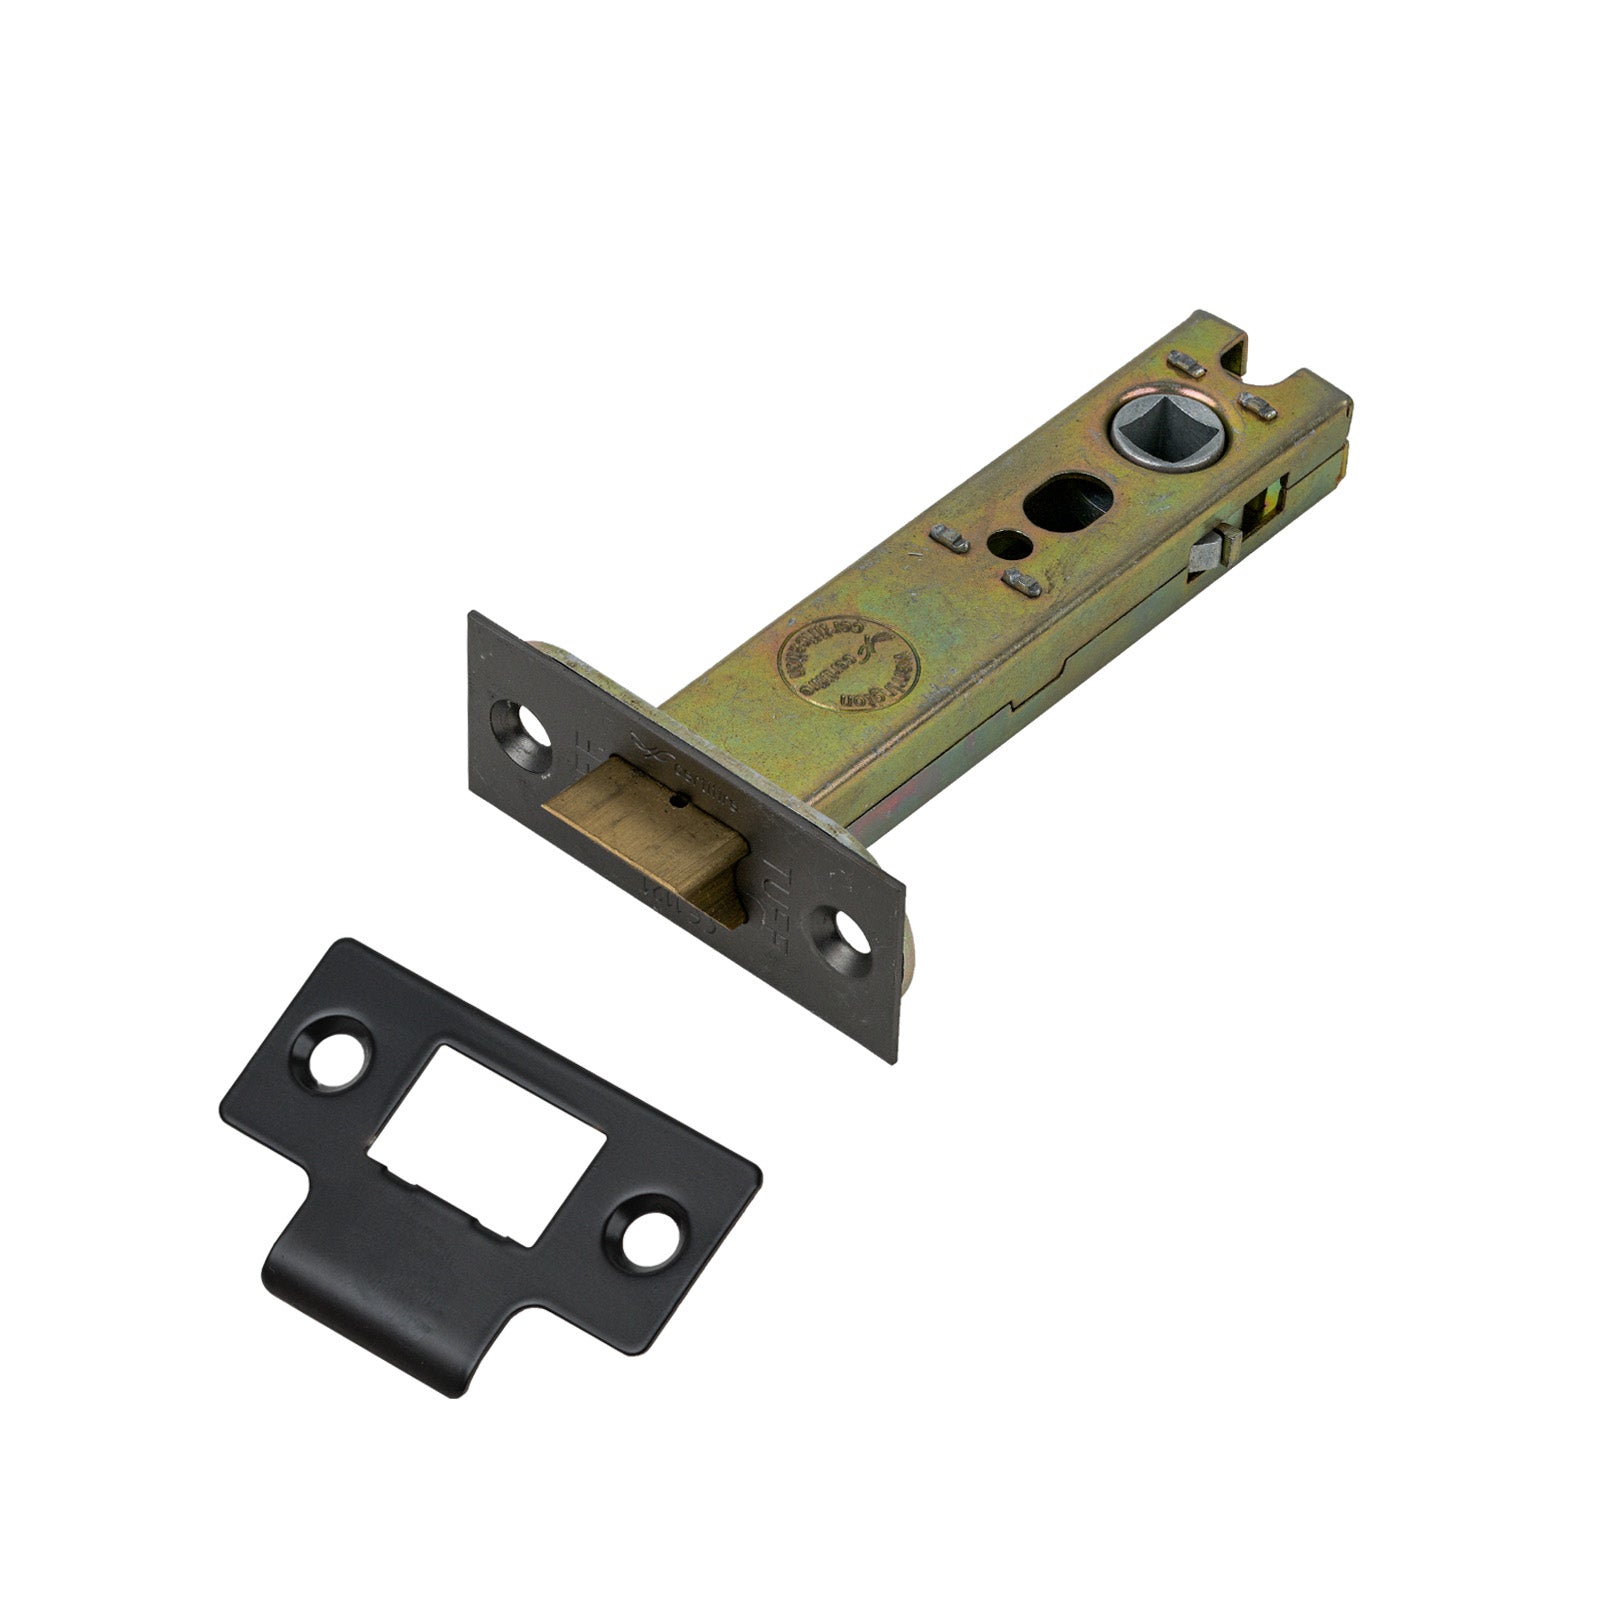 SHOW Heavy Duty Tubular Latch - 4 Inch with Matt Bronze finished forend and striker plate